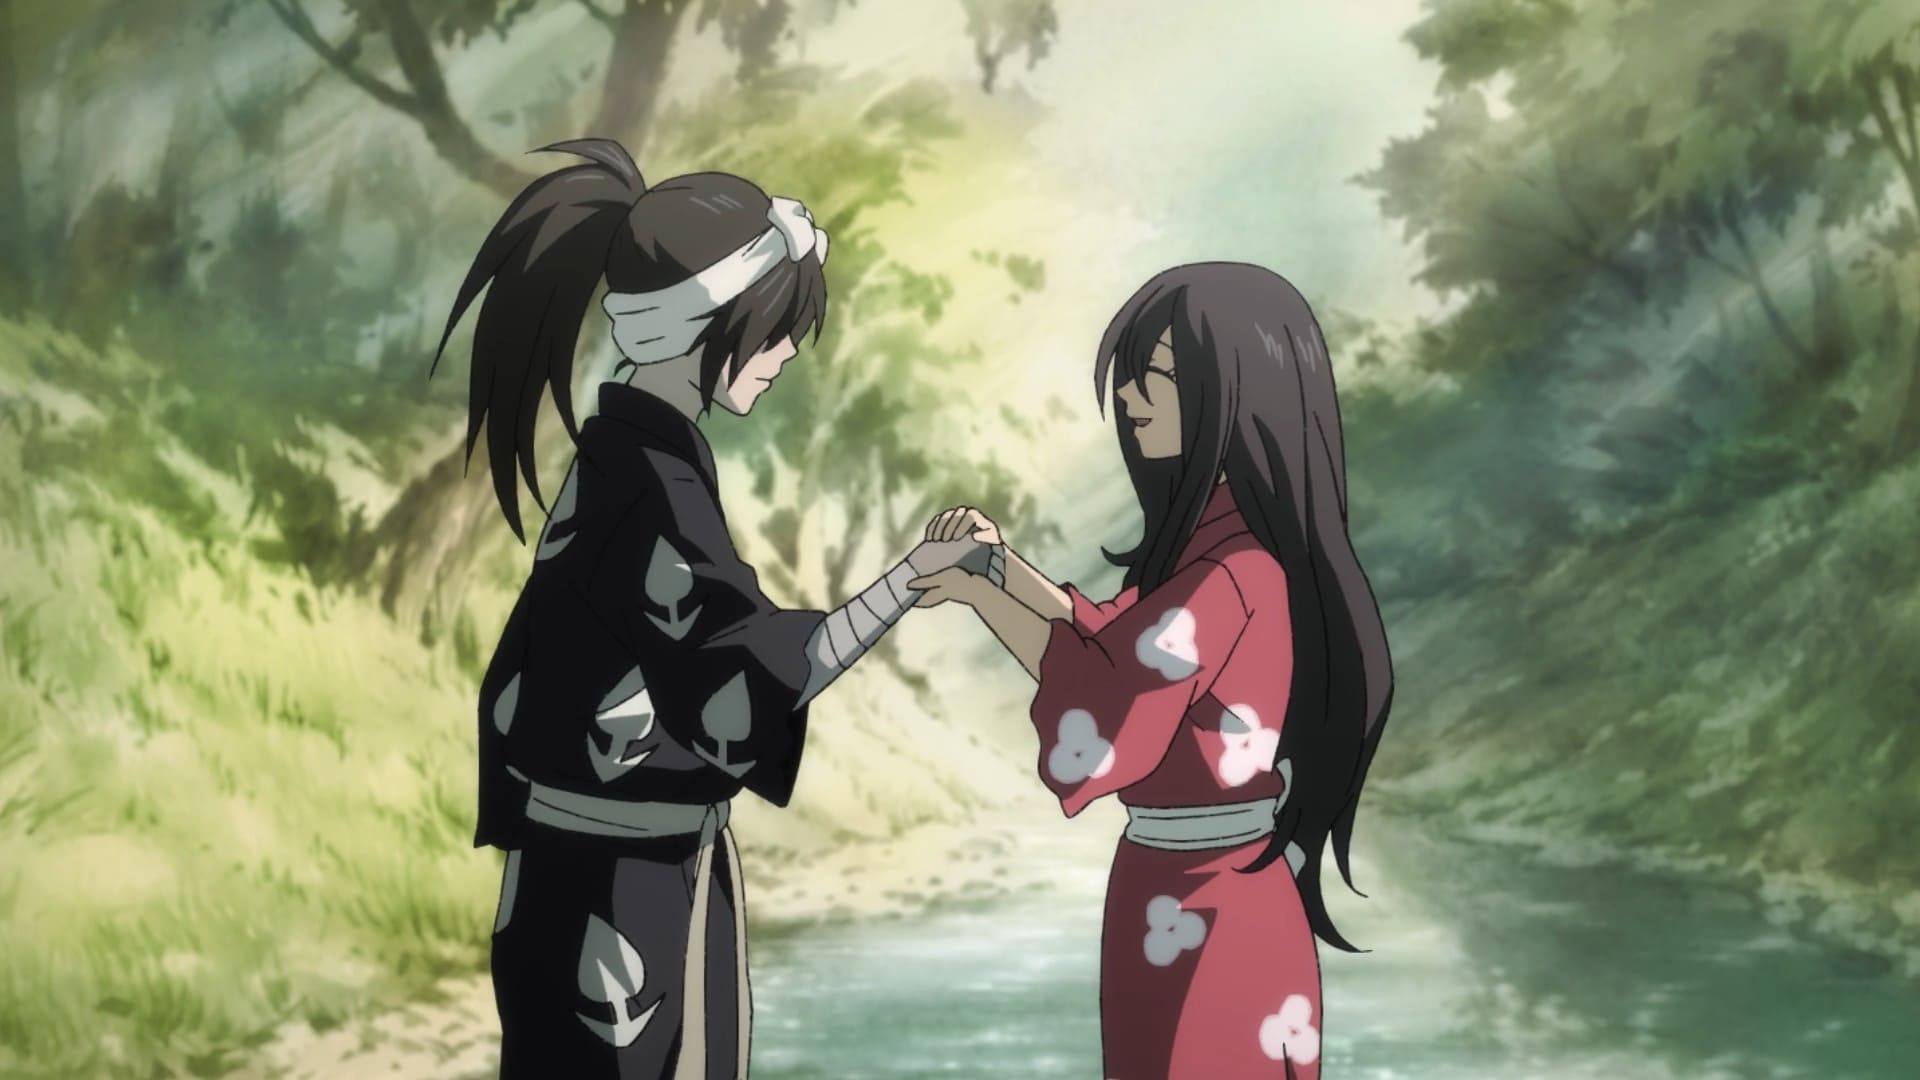 Dororo is a touching tale about a young thief and his enigmatic companion   SYFY WIRE